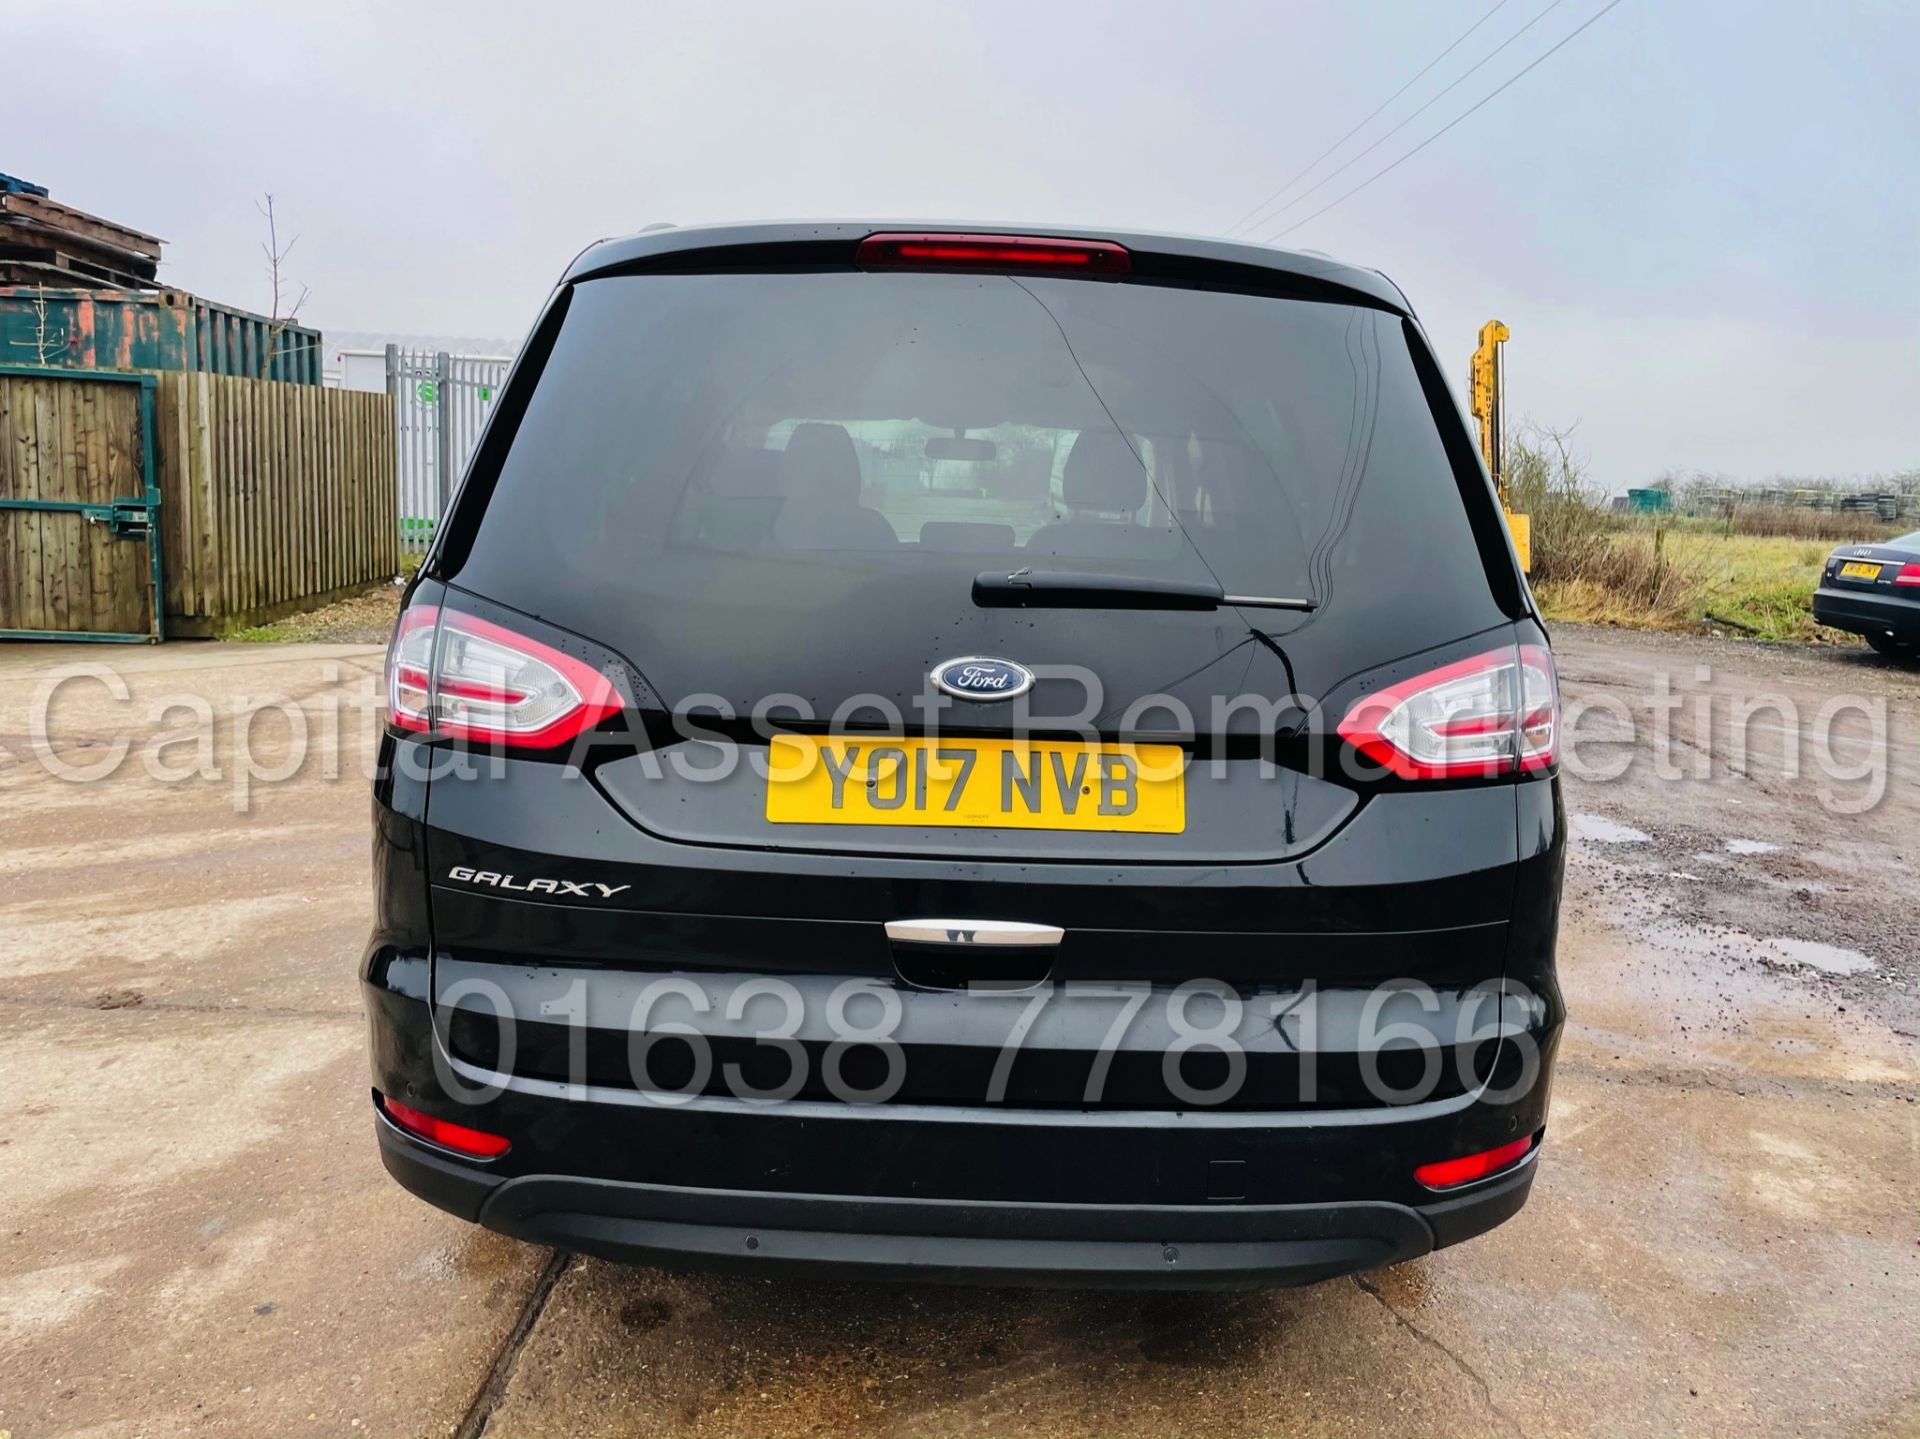 FORD GALAXY *ZETEC EDITION* 7 SEATER MPV (2017 - EURO 6) '2.0 TDCI - AUTO' (1 OWNER FROM NEW) - Image 11 of 48